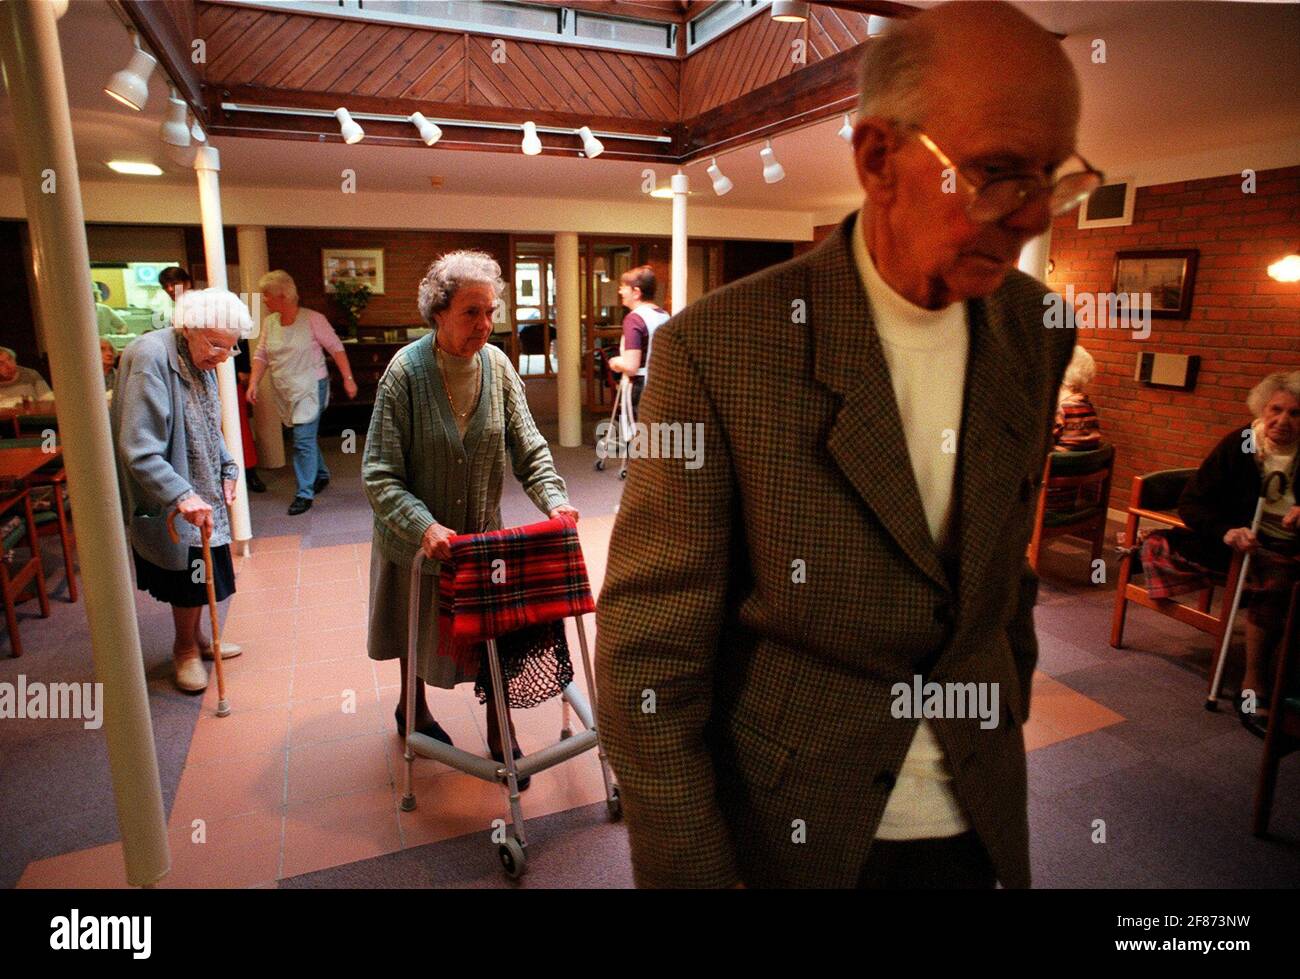 THE FRIARS MEAD RESIDENTIAL JANUARY 2000 CARE HOME IN KINGS LANGLEY. RESIDENTS LEAVING THE DINING ROOM AFTER LUNCH. Stock Photo